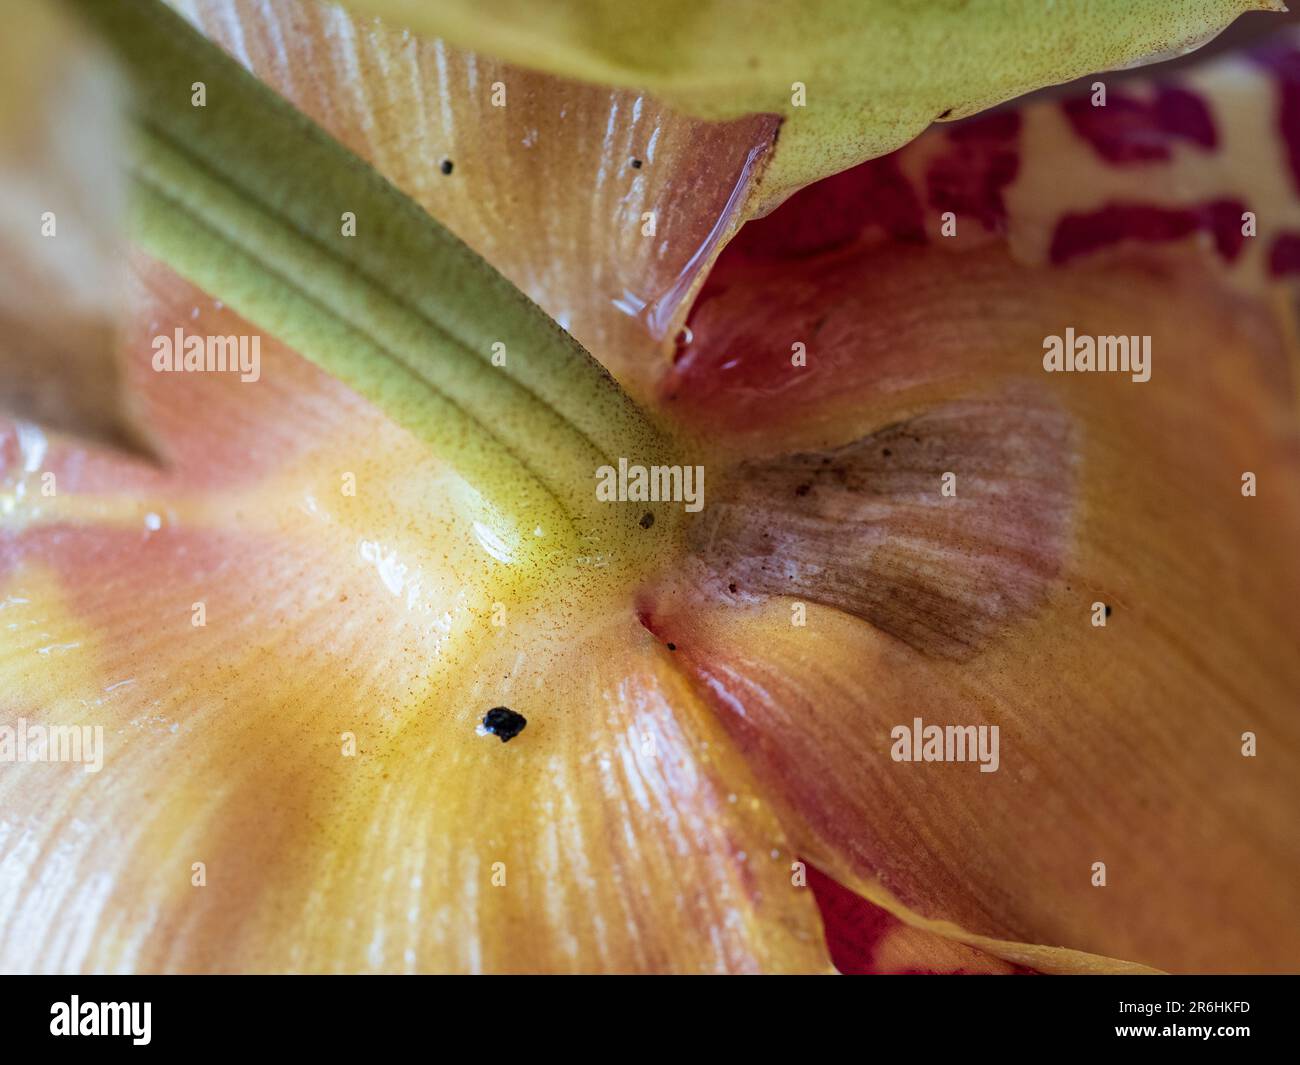 Macro closeup of a Yellow and red patterned Stanhopea Orchid flower where the green stem meets the petals, Australian coastal garden Stock Photo